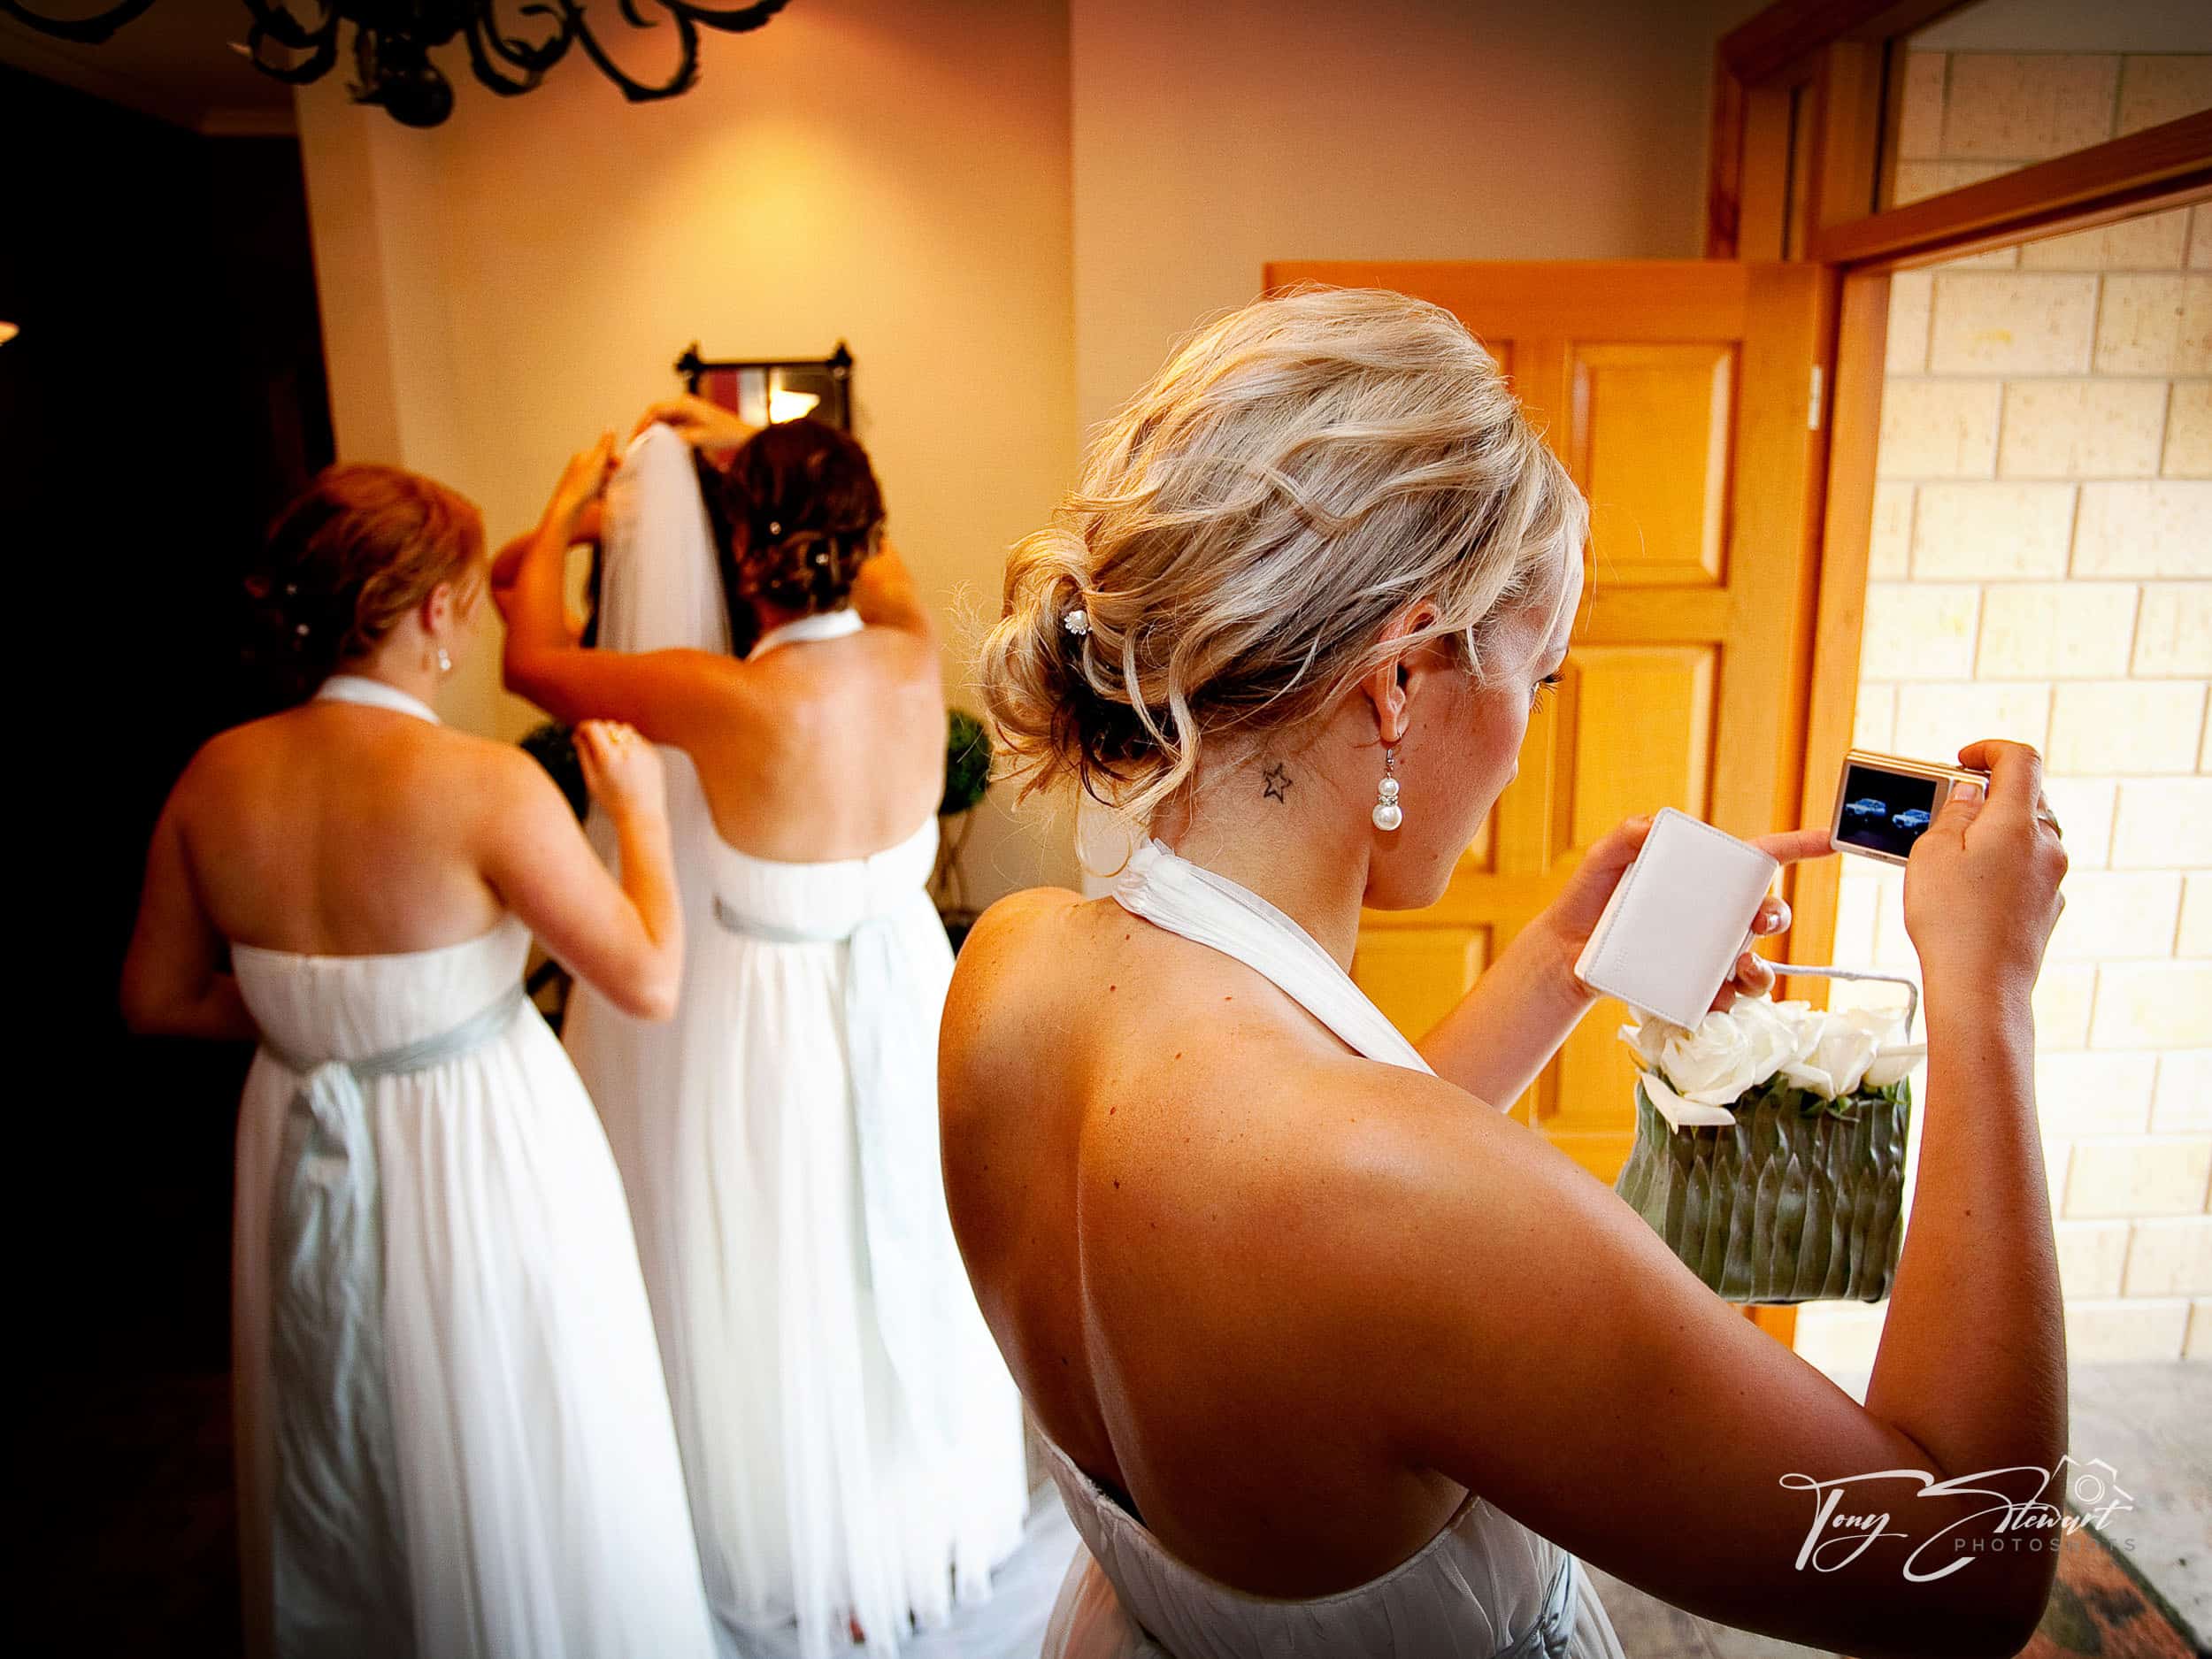 A bridesmaid checks earrings, as the bride gets her veil fitted before her wedding ceremony.